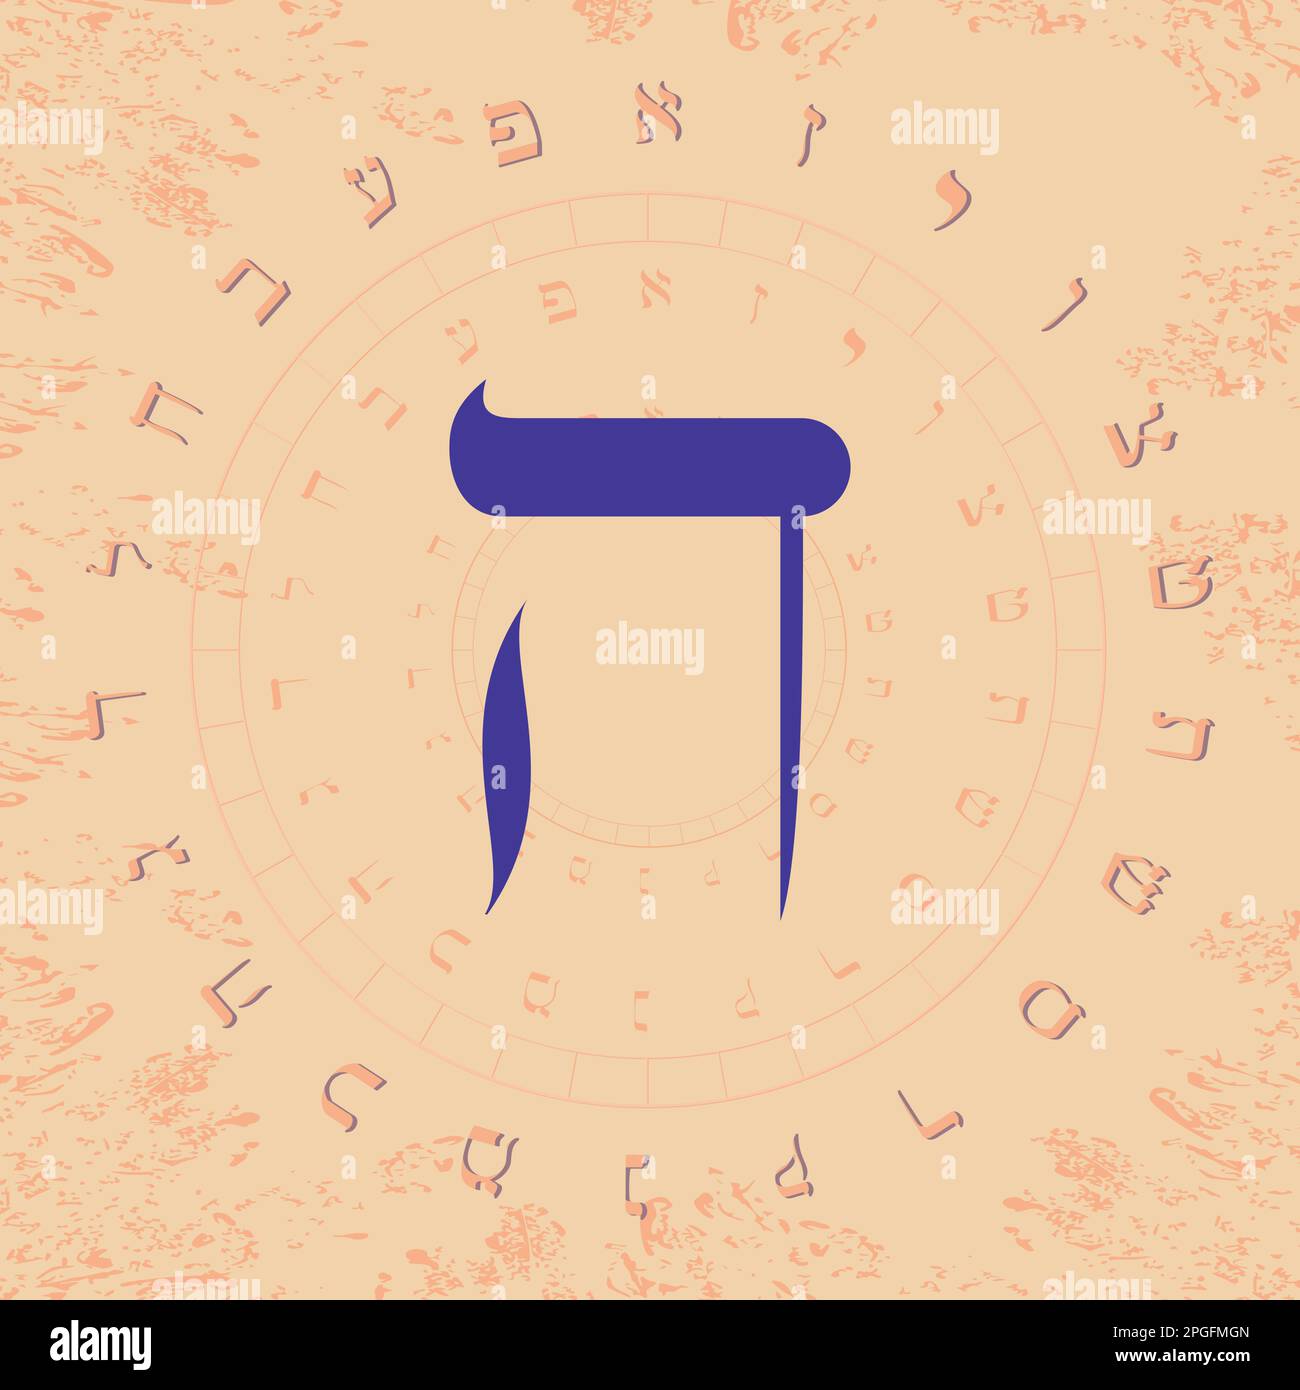 Vector illustration of the Hebrew alphabet in circular design. Hebrew letter called Hei large and blue. Stock Vector